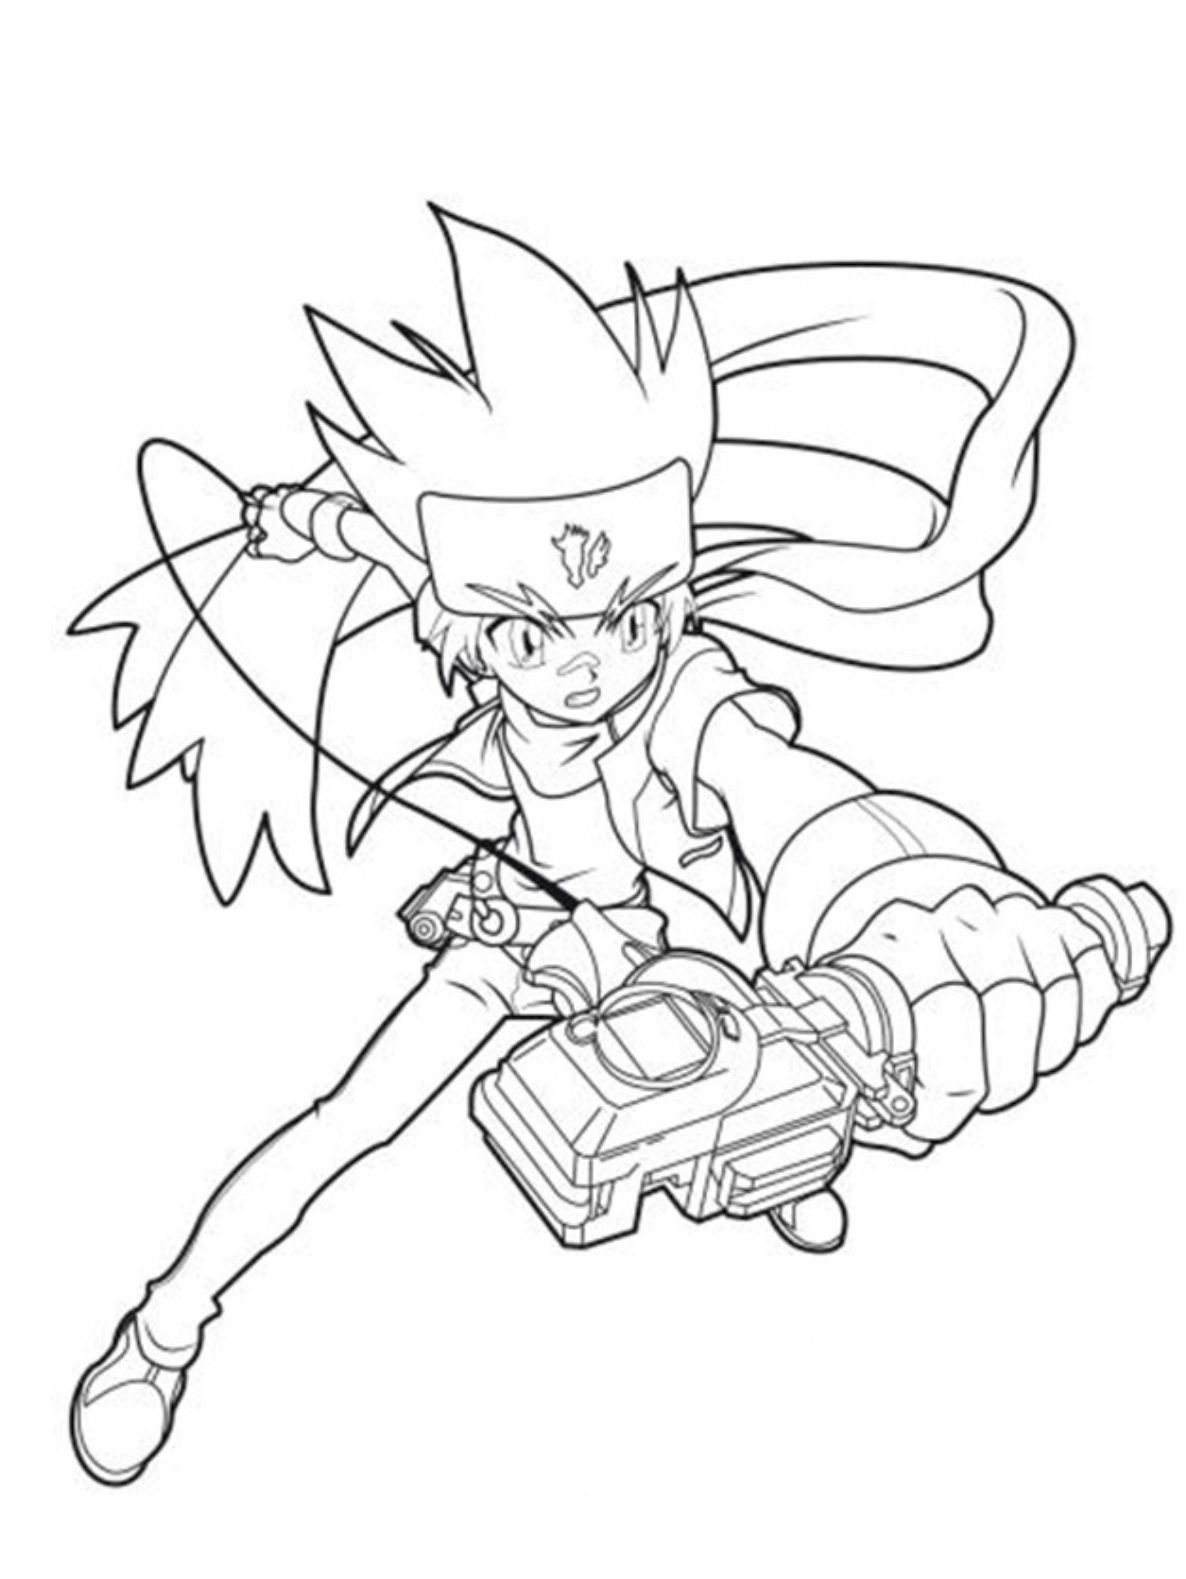 beyblade burst turbo valtreyk coloring pages